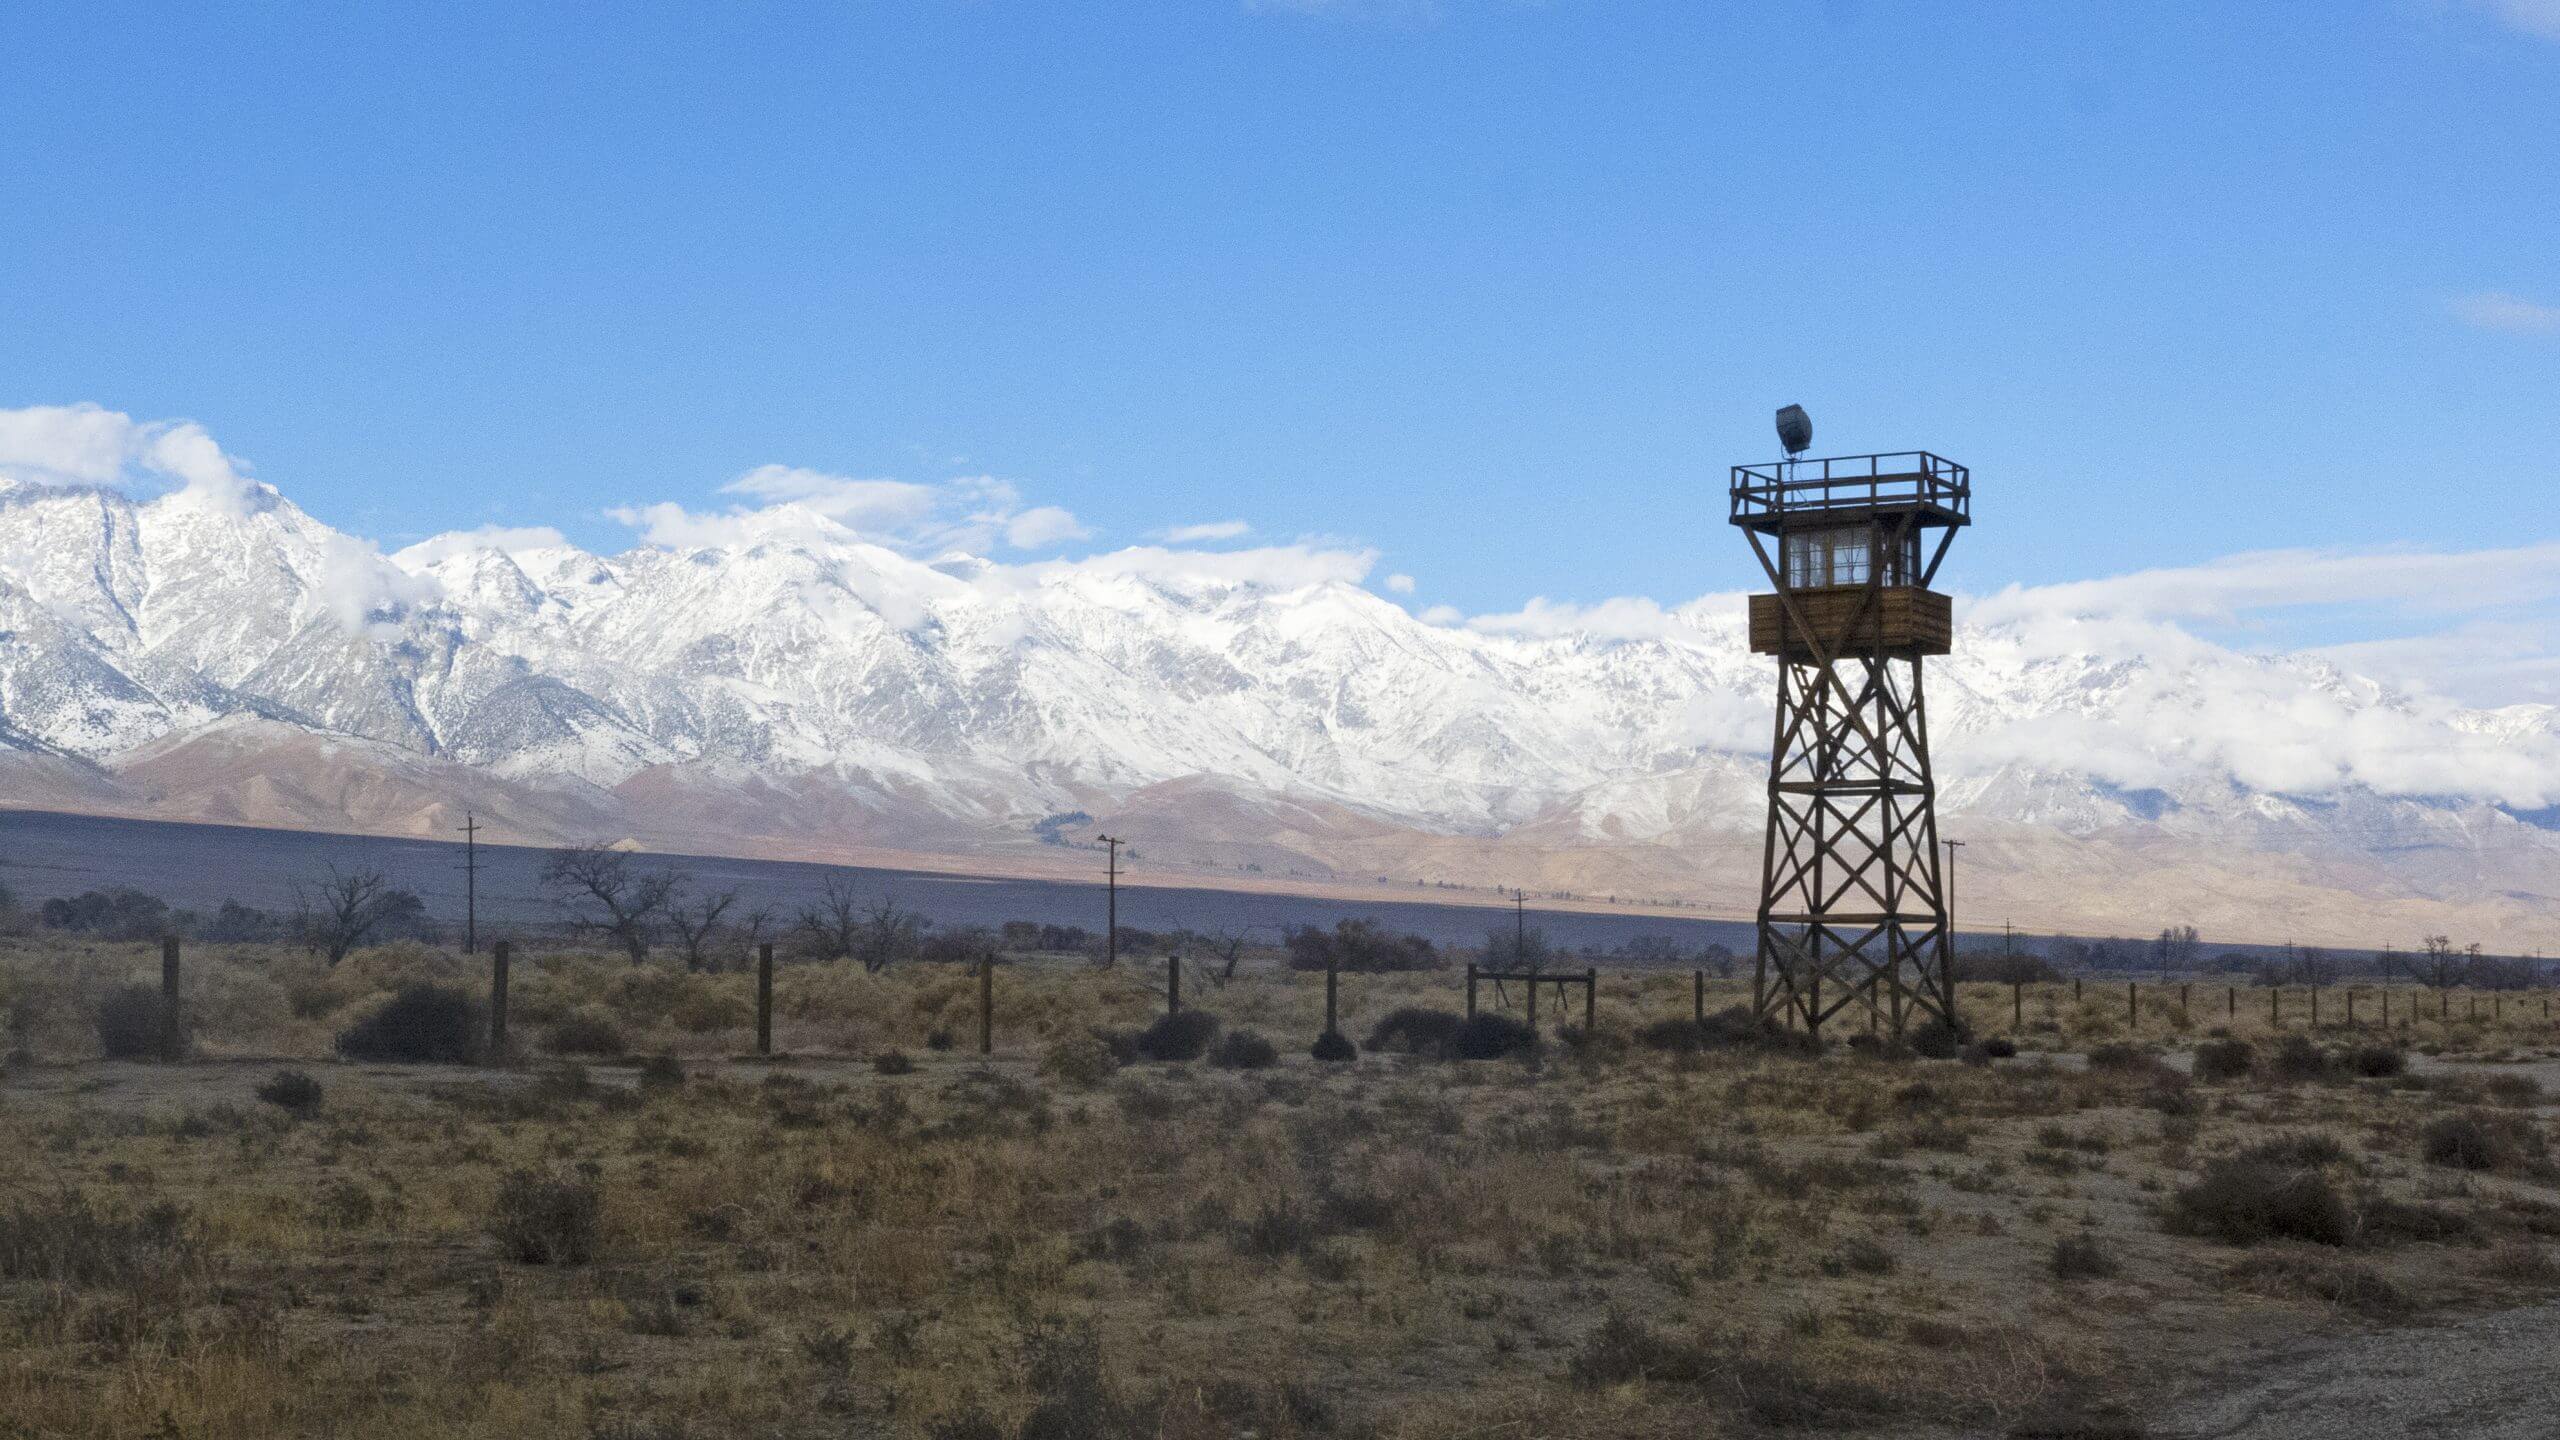 Still from Manzanar Diverted: When Water Becomes Dust. A watchtower stands in a field with a mountain range and blue skies in the background.